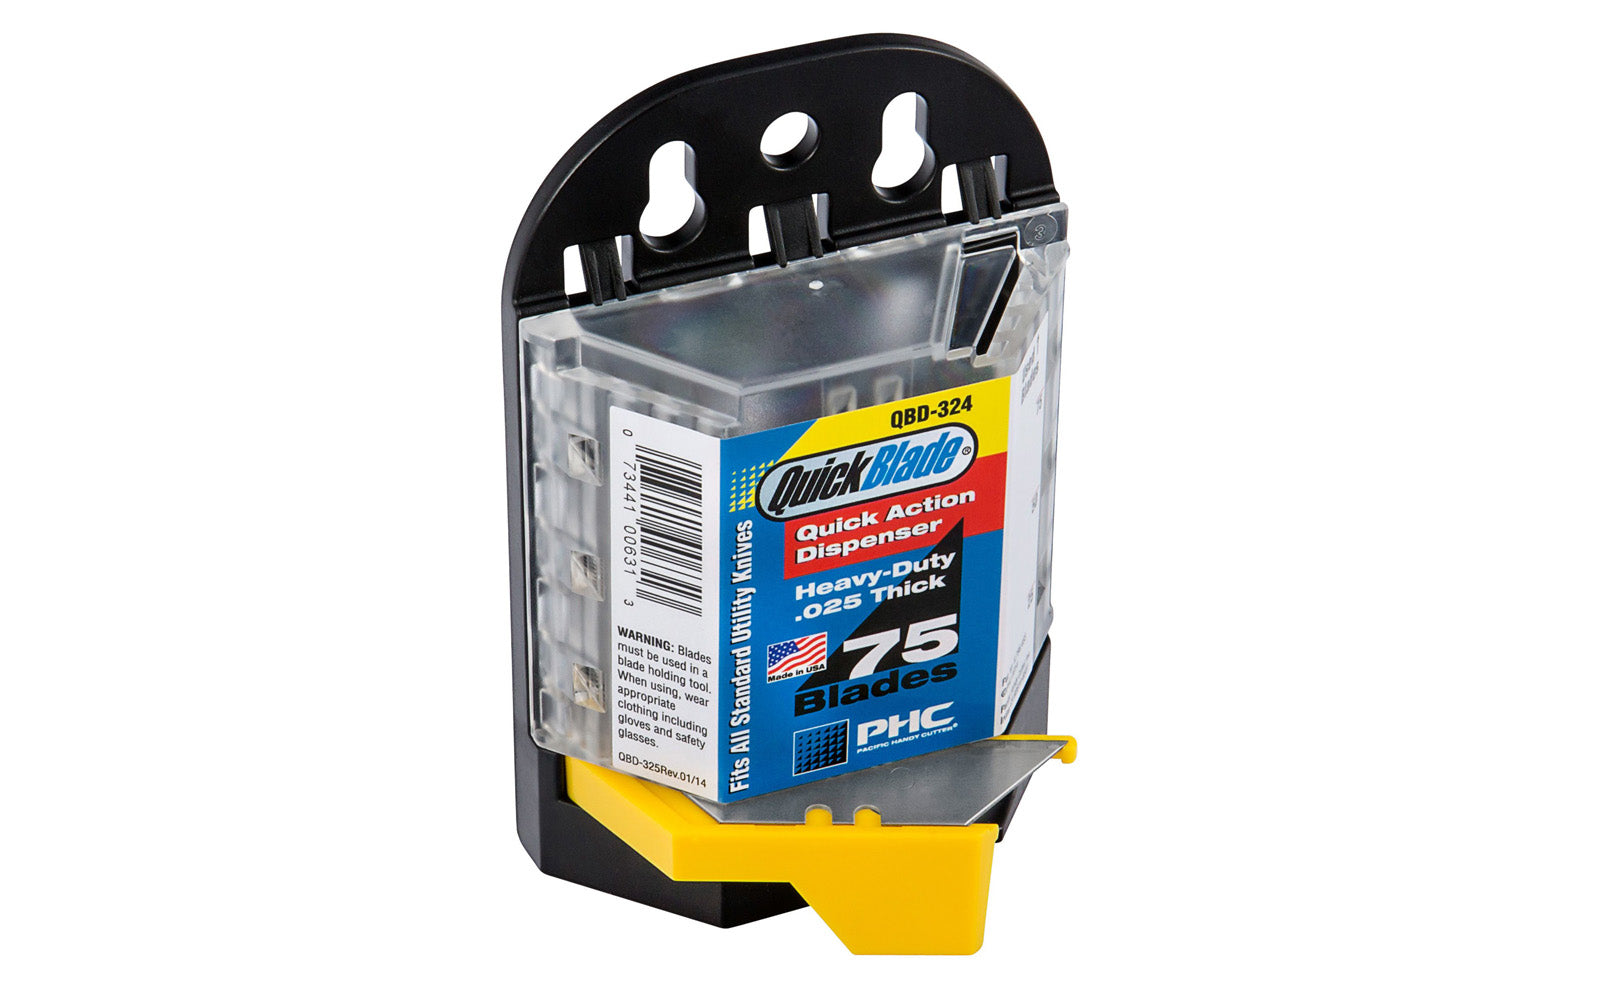 Standard Utility Blade Dispenser safely dispenses one Standard Utility Blade at a time from a durable case. Dispenser contains 75 standard blades which are made of high quality carbon steel & hold a sharp edge. 0.25